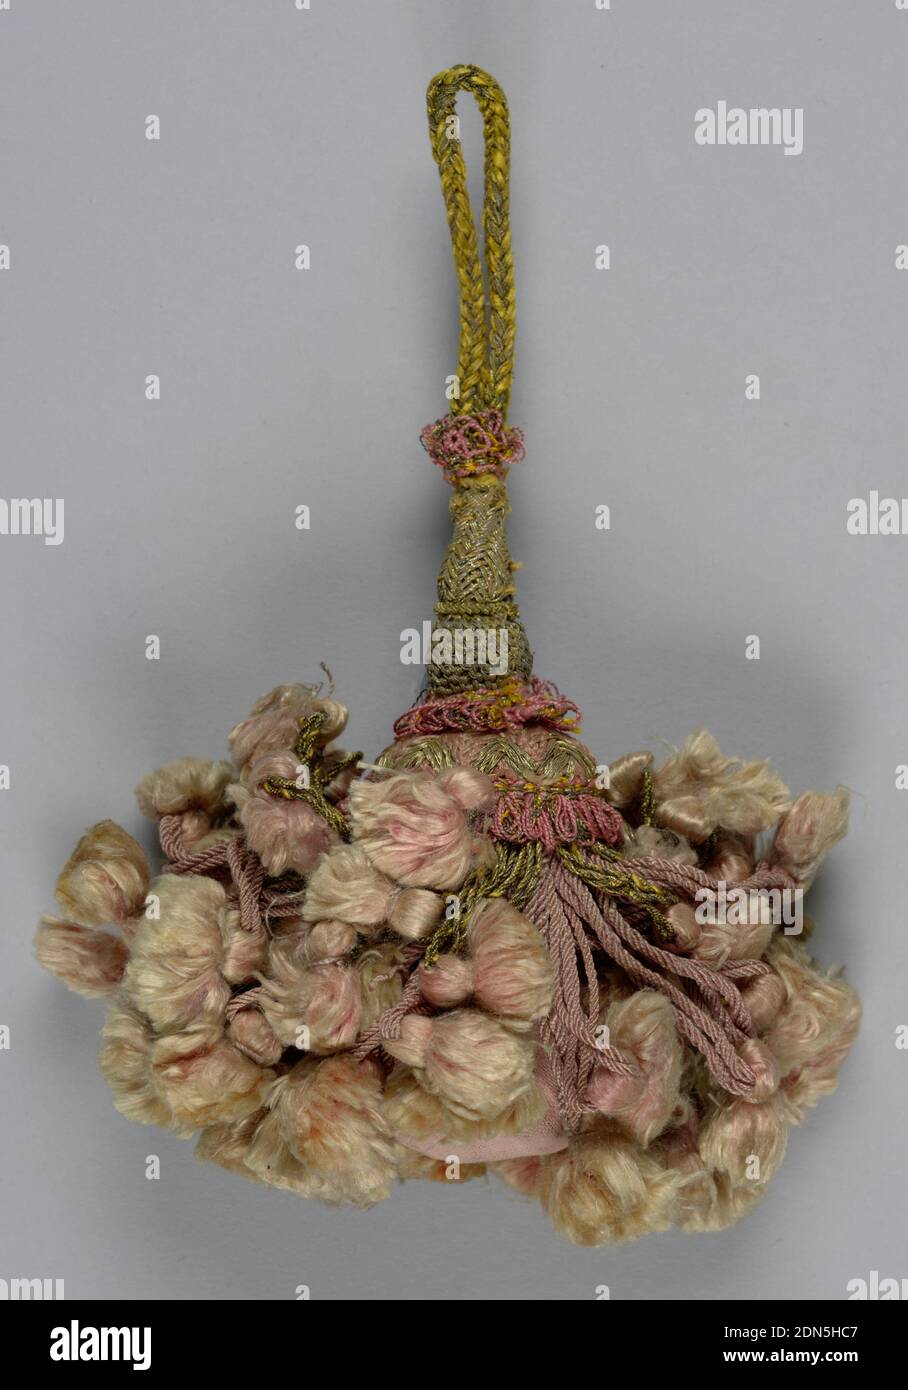 Metallic Gold Chair tie Cord with two Turk Knot Tassels as low as